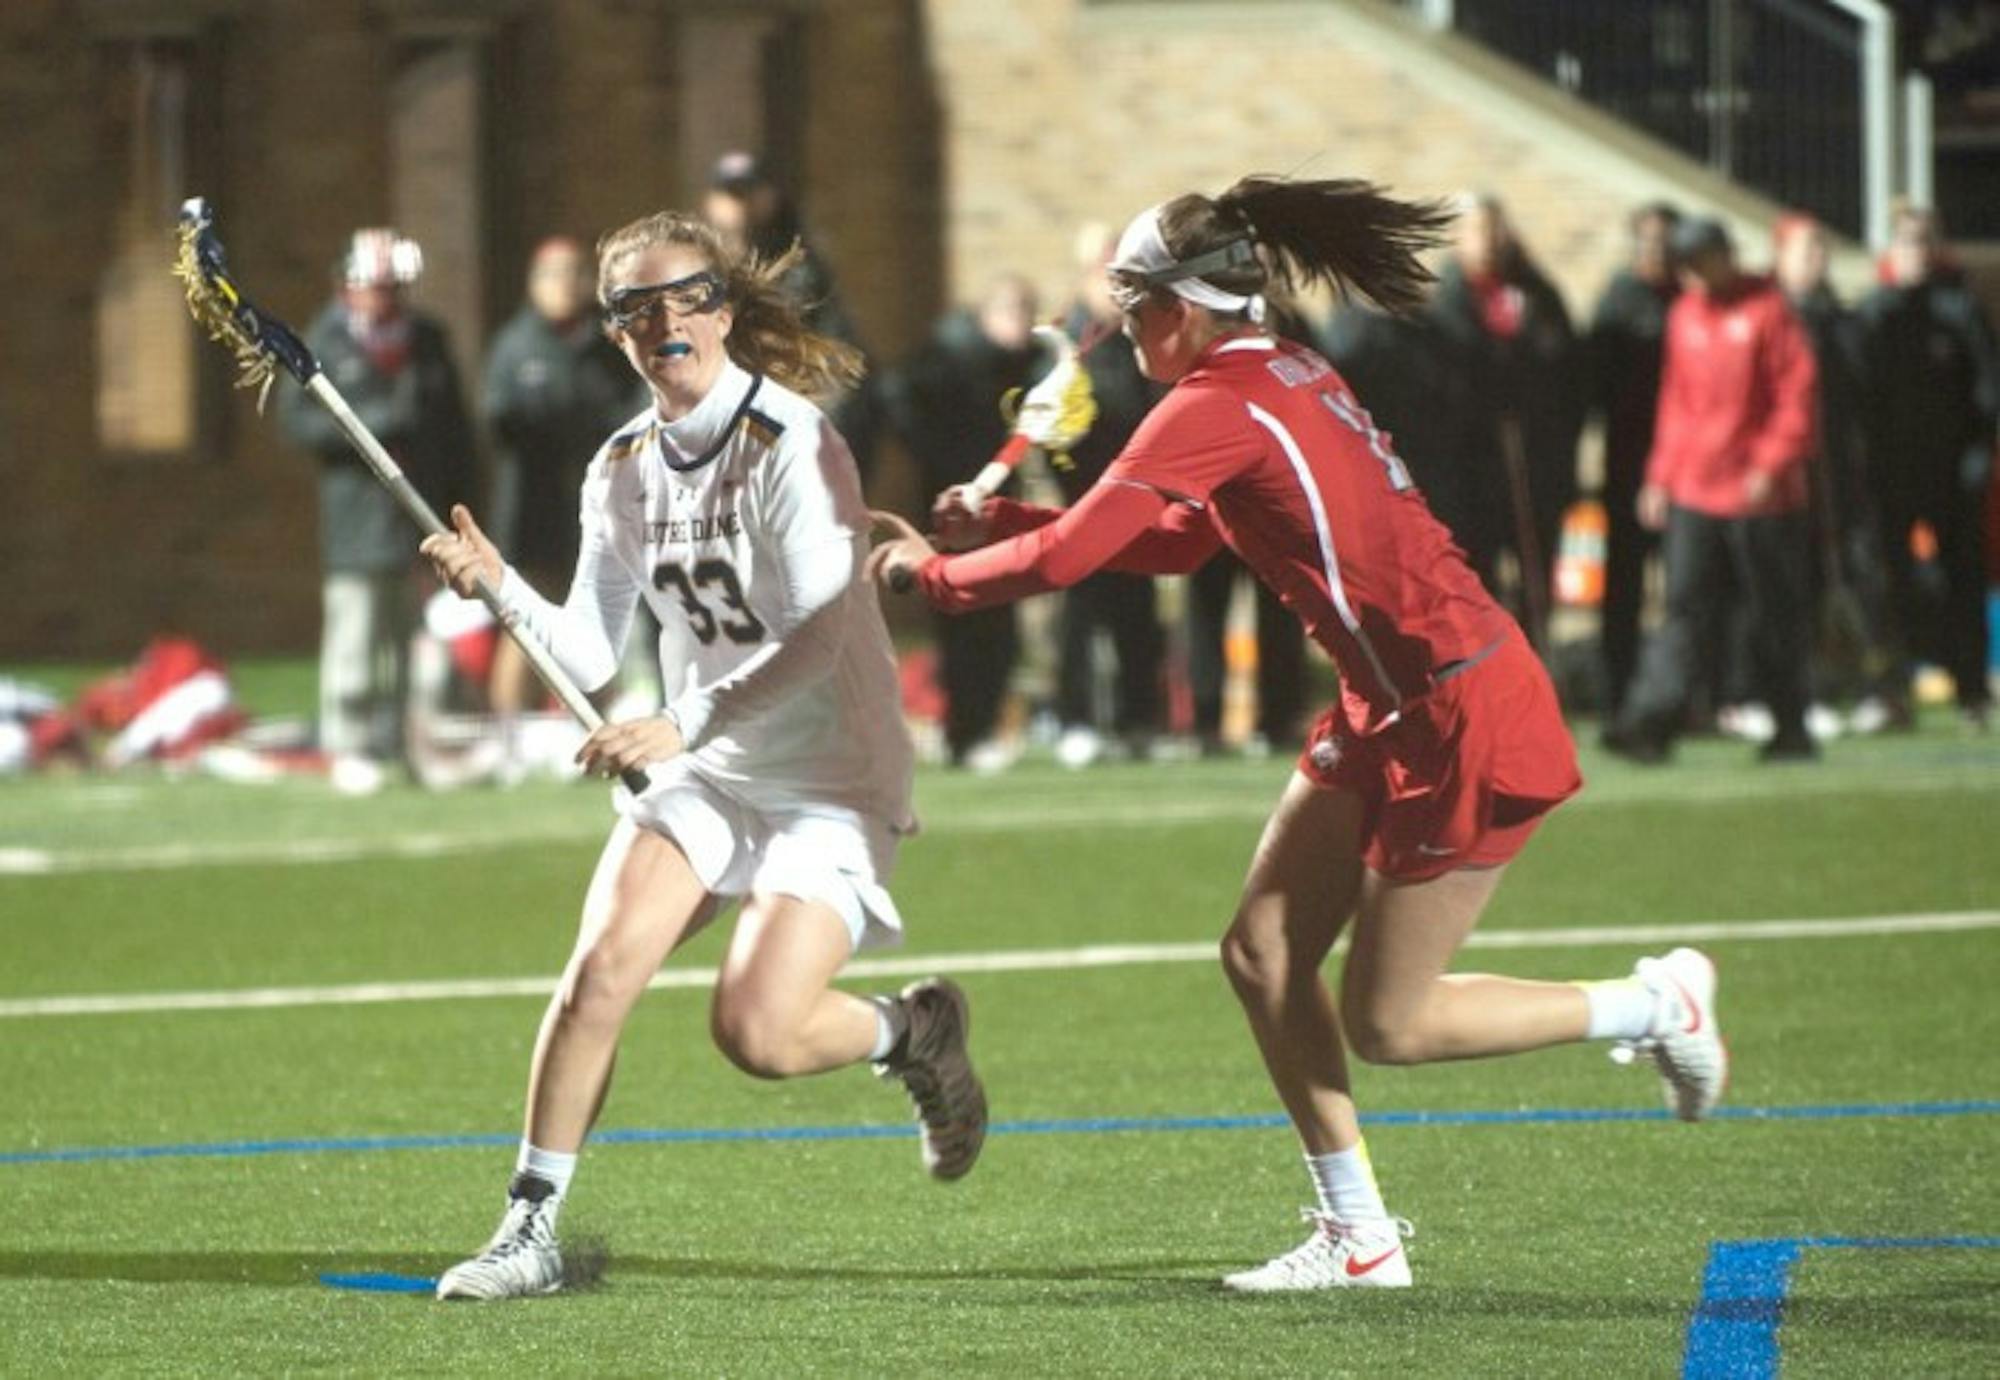 Irish sophomore attack Samantha Lynch dodges a defender during Notre Dame's 16-13 win over Ohio State on March 7 at Arlotta Stadium.